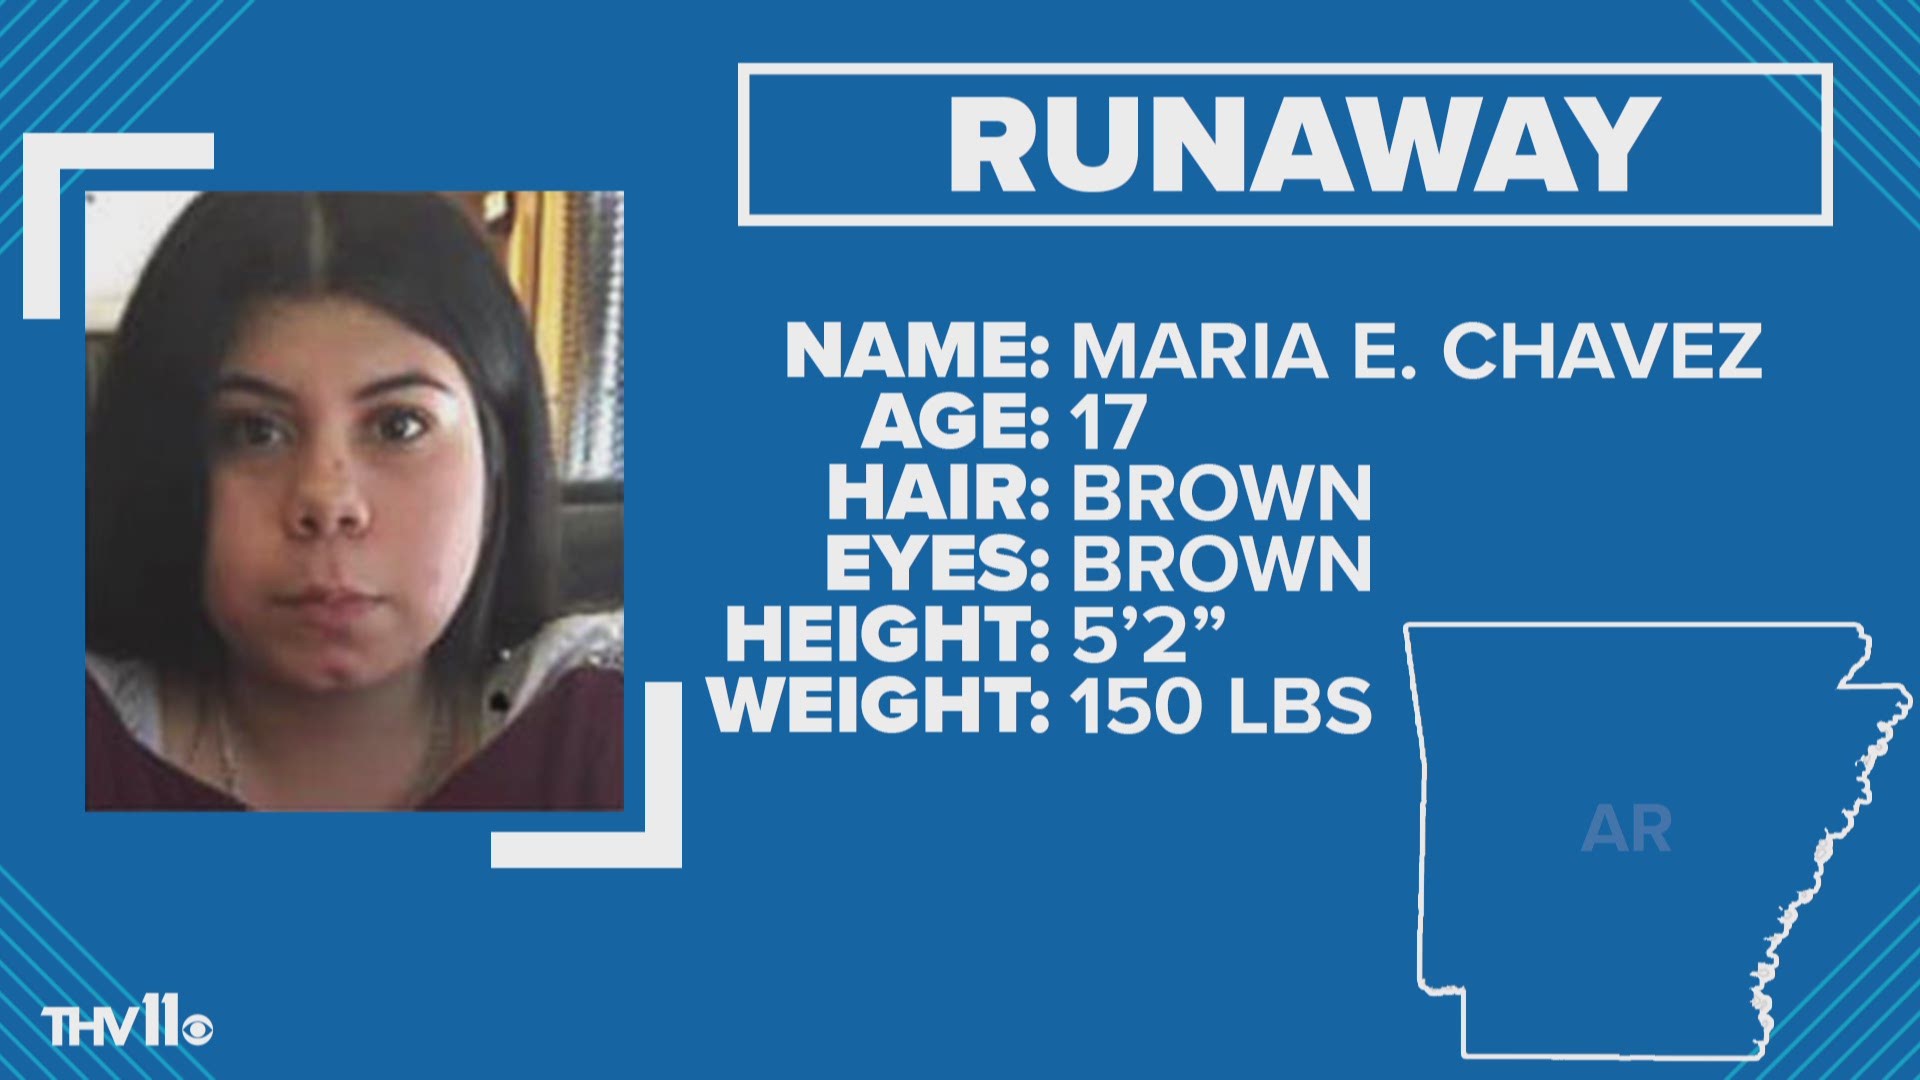 Maria E. Chavez is a 17-year-old Hispanic female who is five feet two inches tall and weighs 150 pounds.